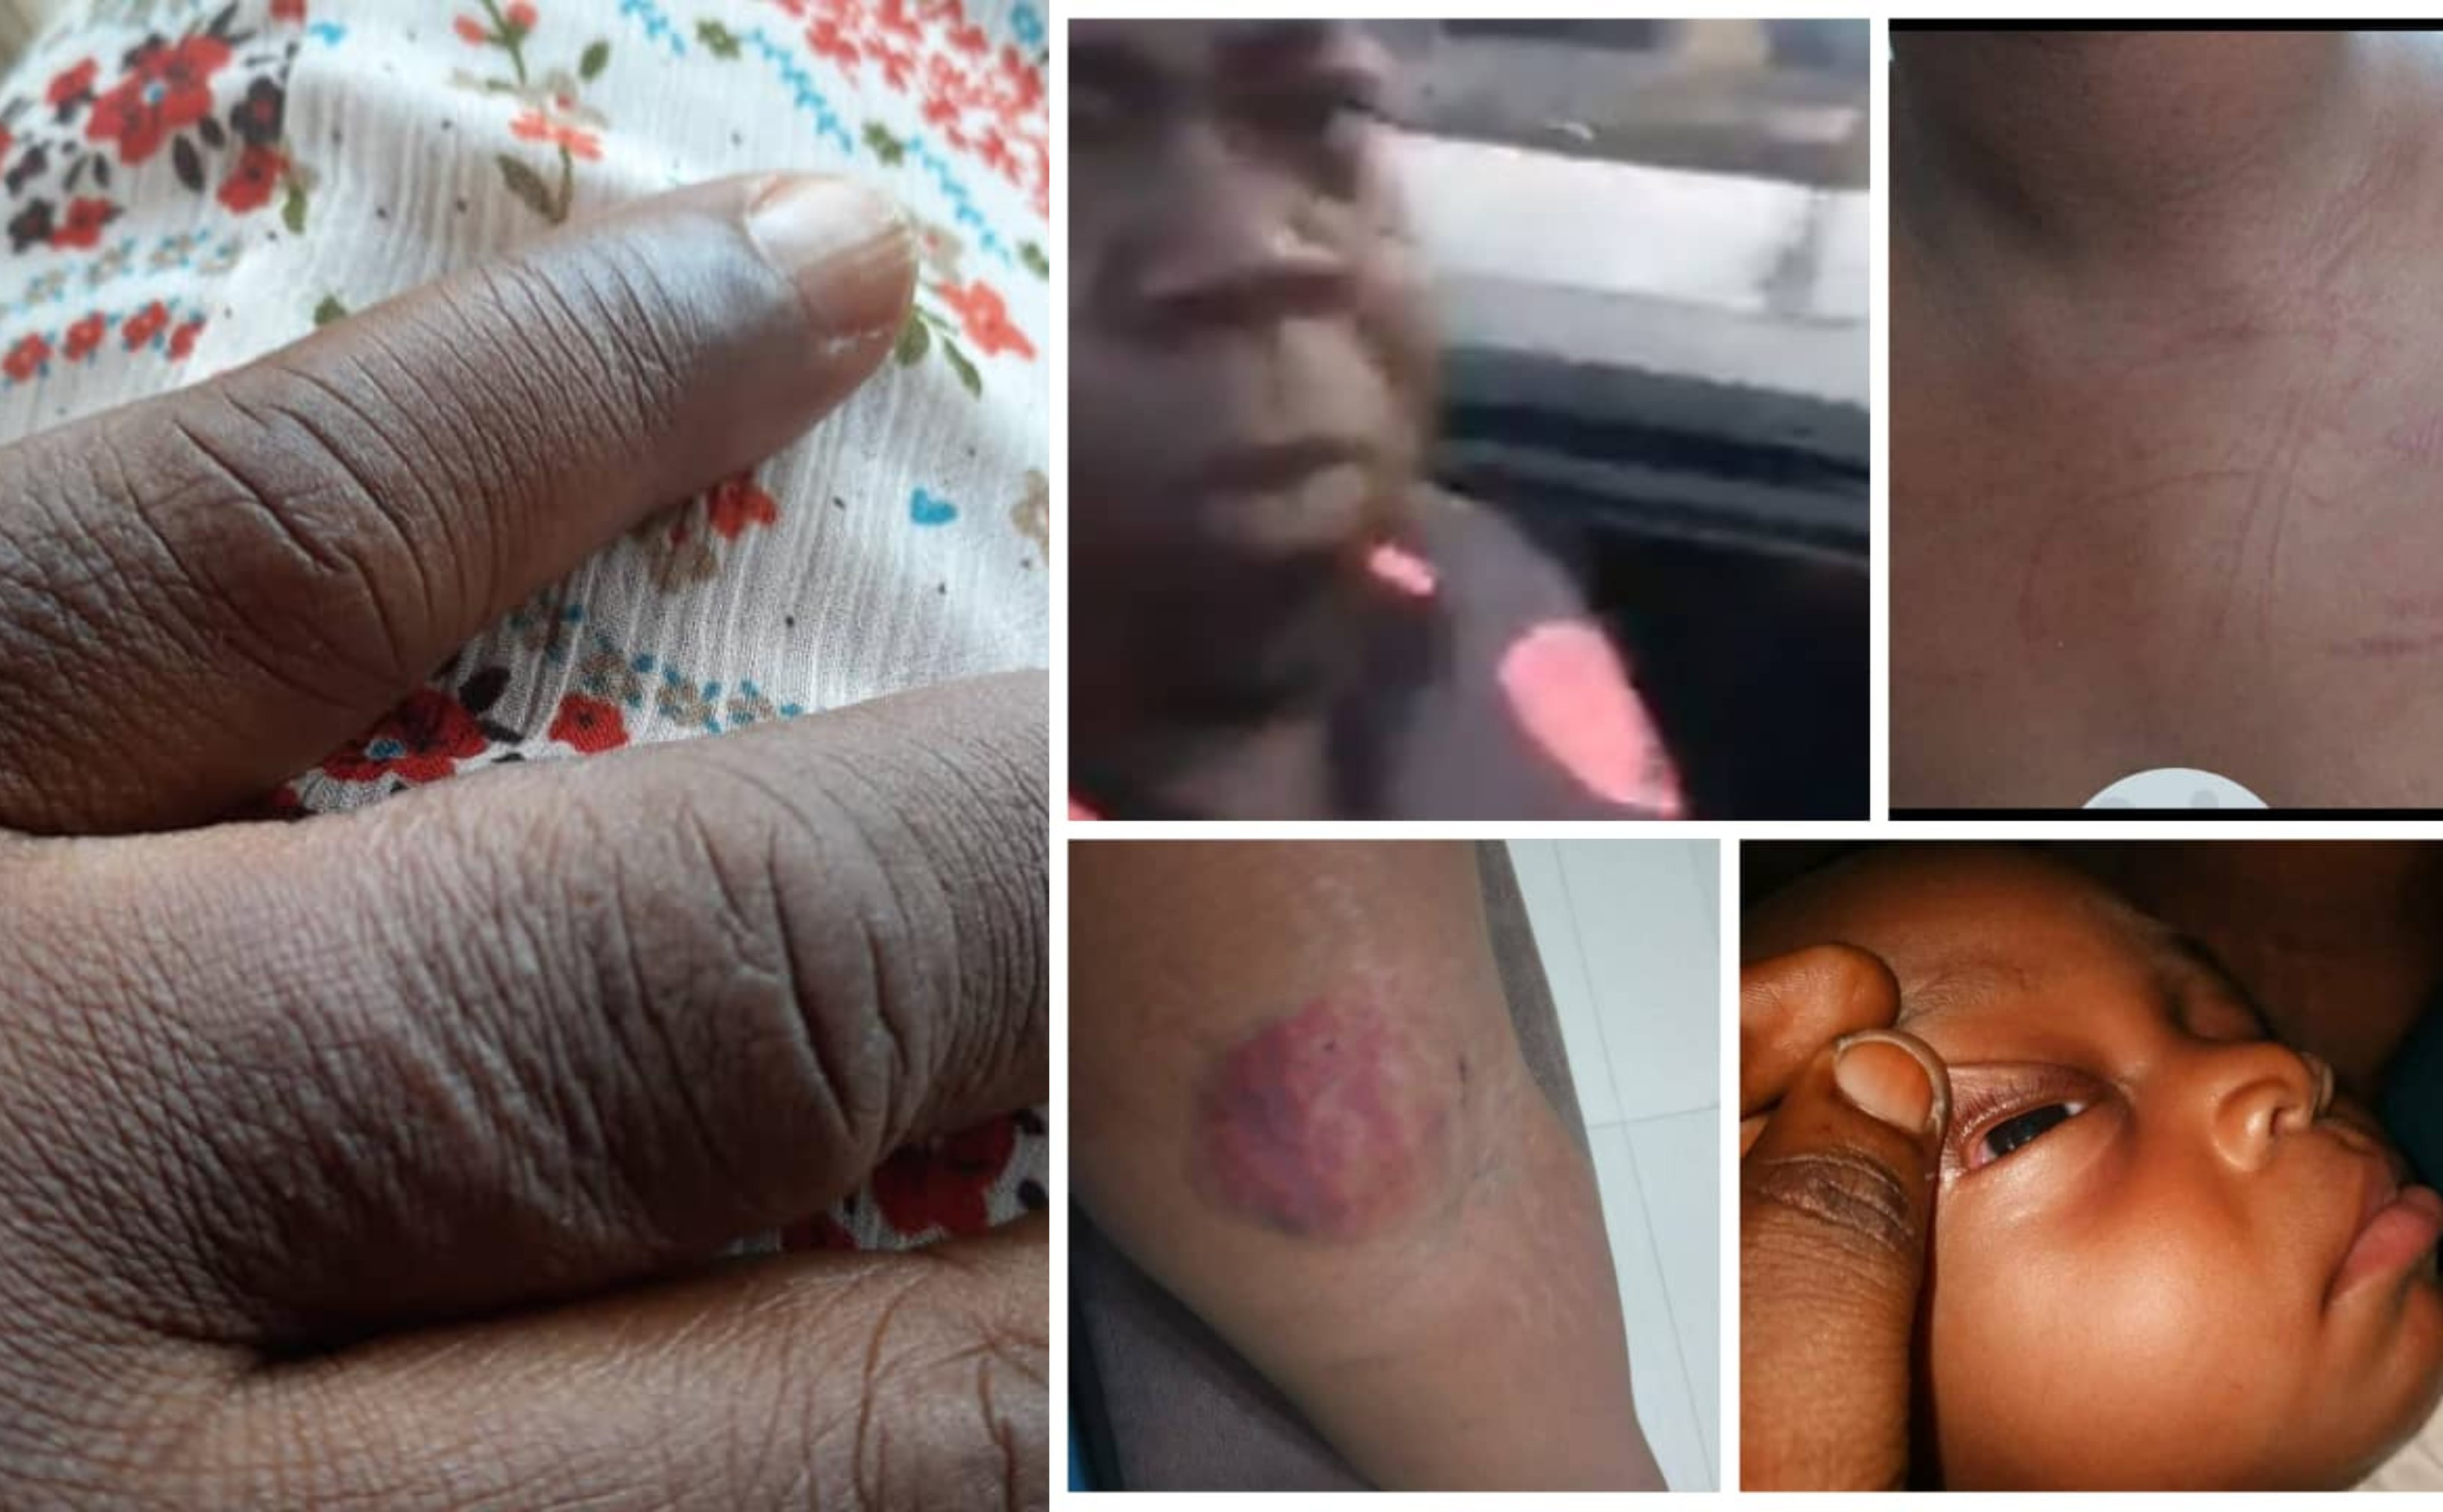 51-year-old woman counters nursing mother's claim of police officer assaulting her and her baby lindaikejisblog